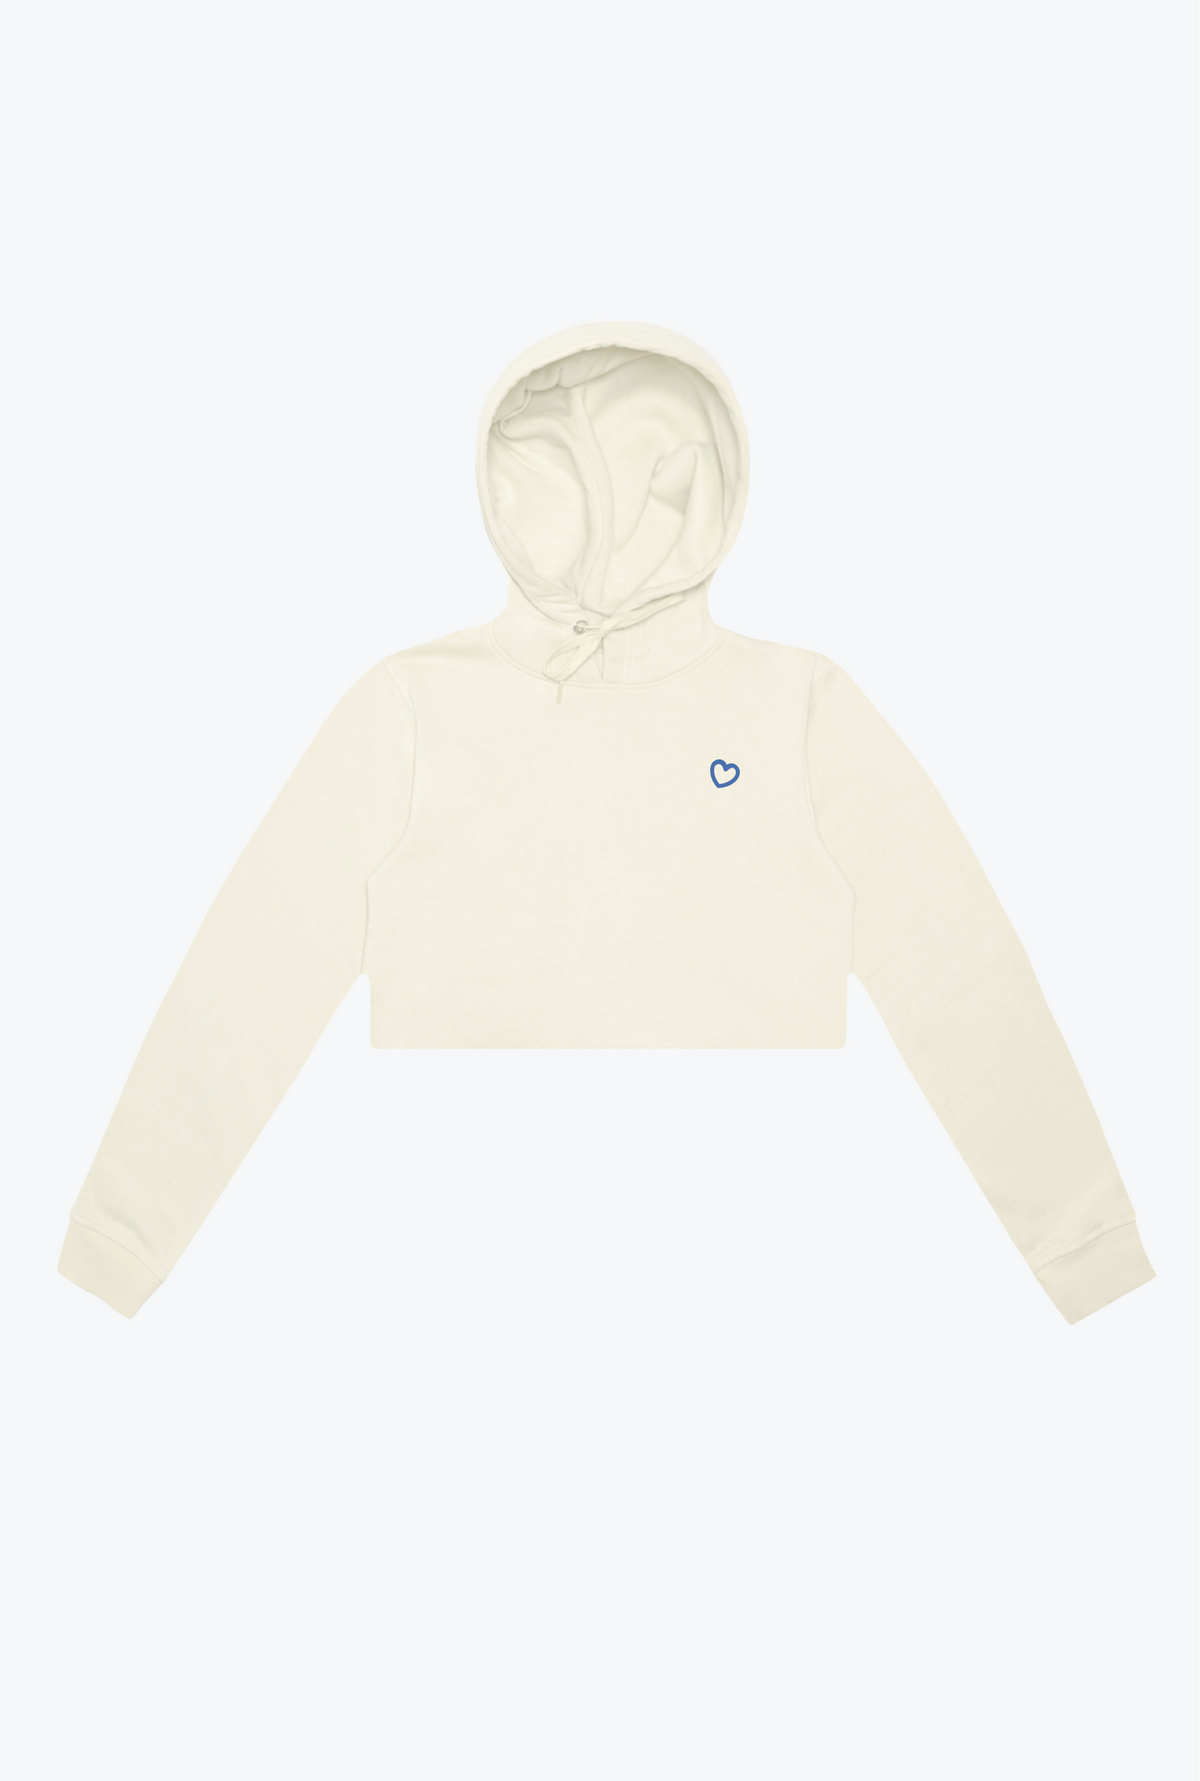 Chaos Cropped Hoodie - Ivory